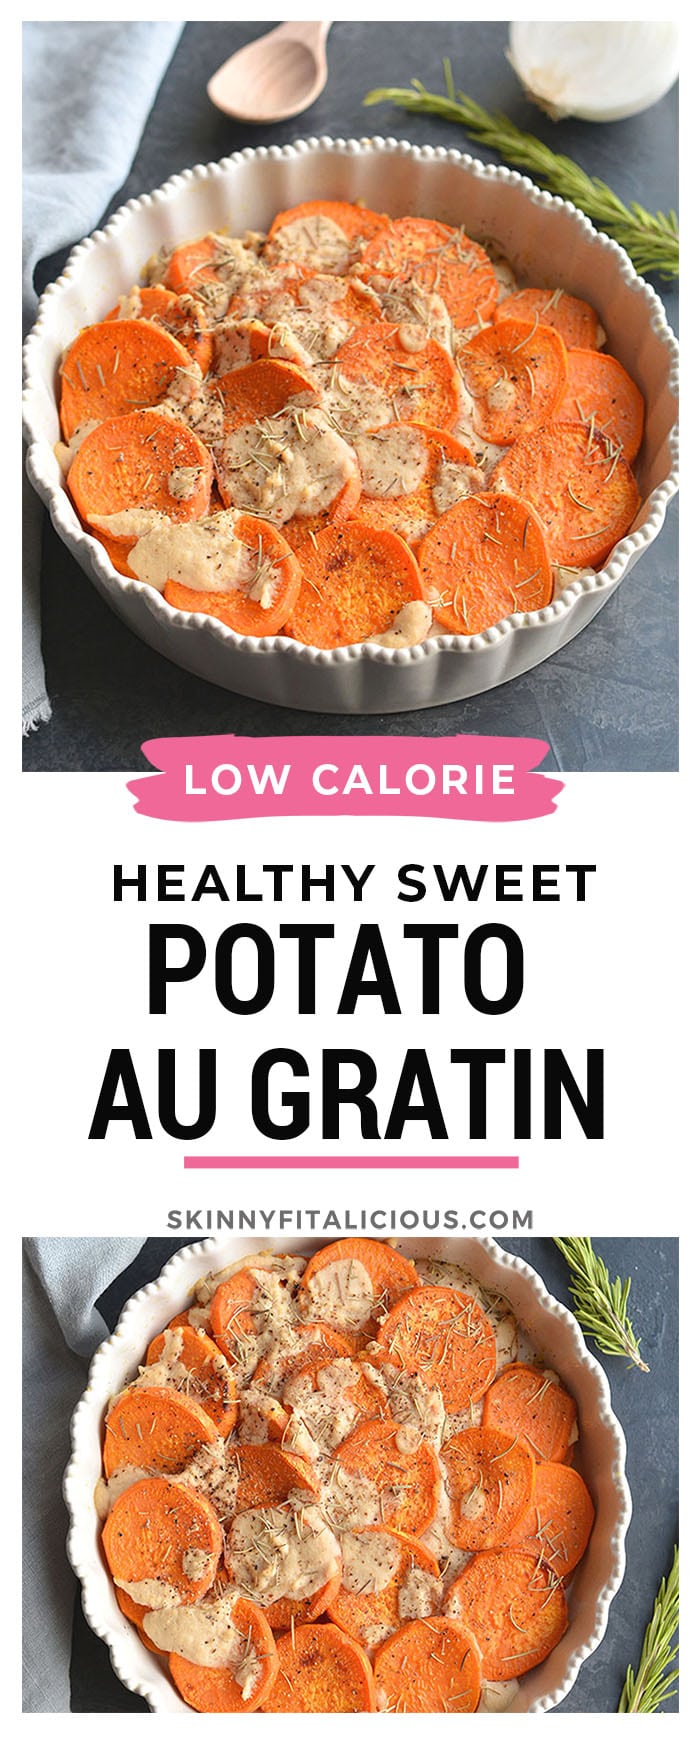 Whole30 Sweet Potato Au Gratin are sweet potatoes drizzled in a dairy-free cashew "cream" sauce. This Vegan and Paleo dish makes an easy side dish to a family dinner or a delicious to your holiday table